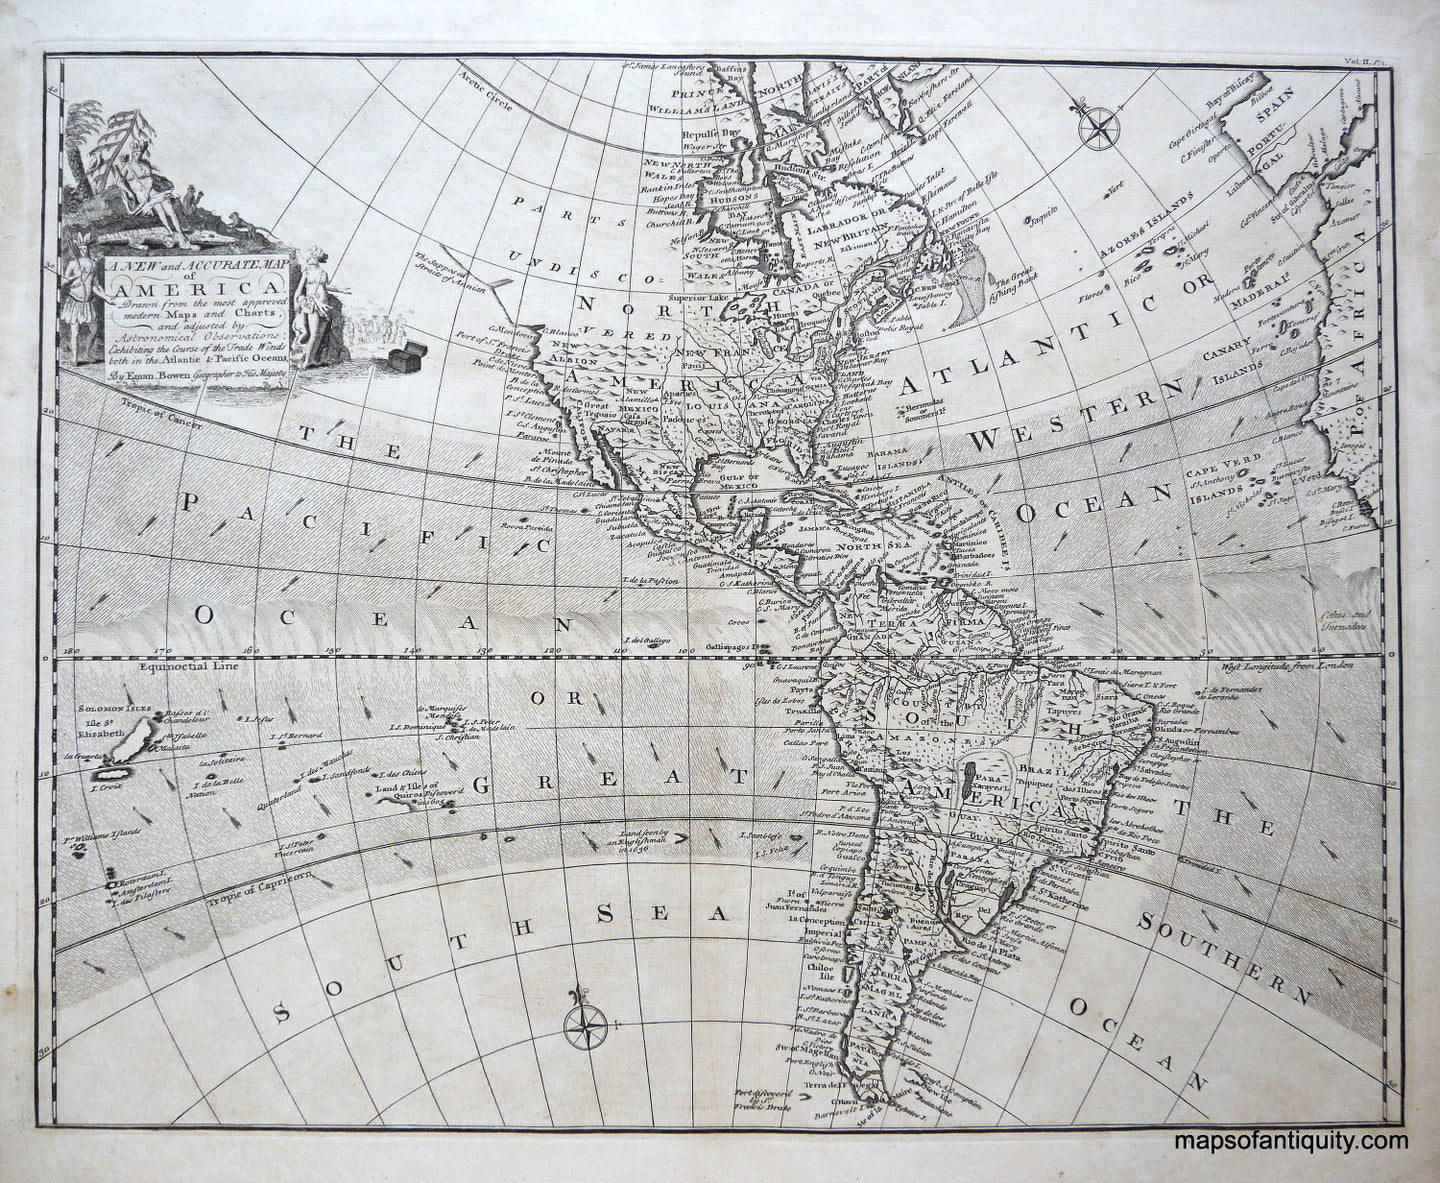 Antique-Engraved-Black-and-White-Map-A-New-and-Accurate-Map-of-America-**********-World--1747-Emmanuel-Bowen-Maps-Of-Antiquity